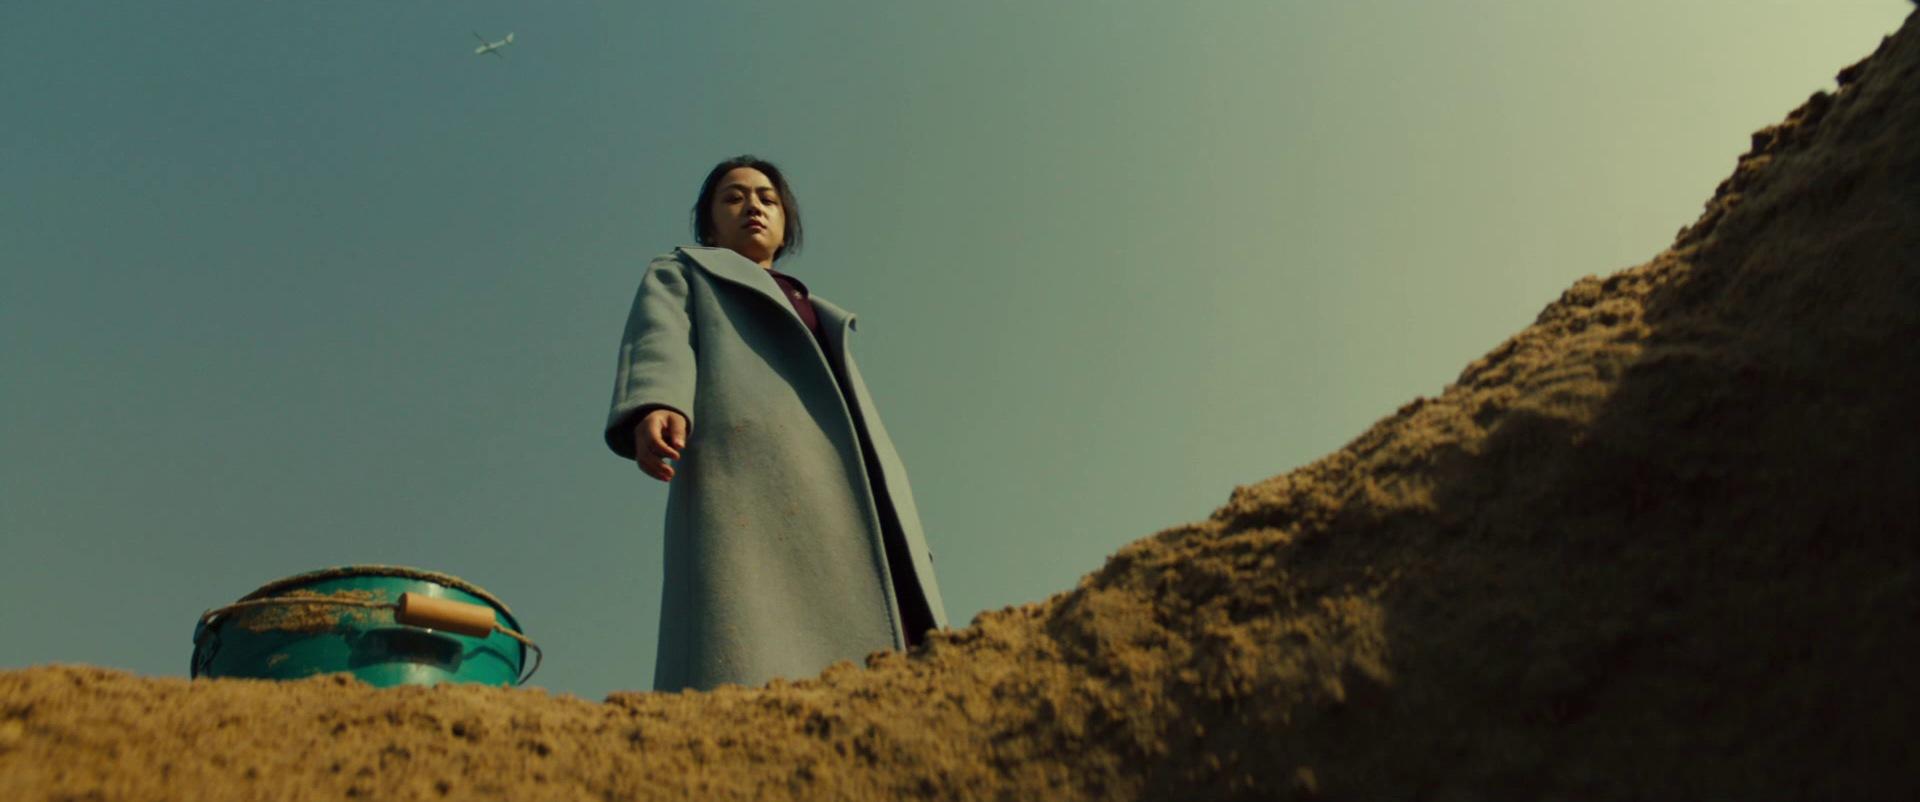 Song Seo-rae looks down into a hole in the sand.